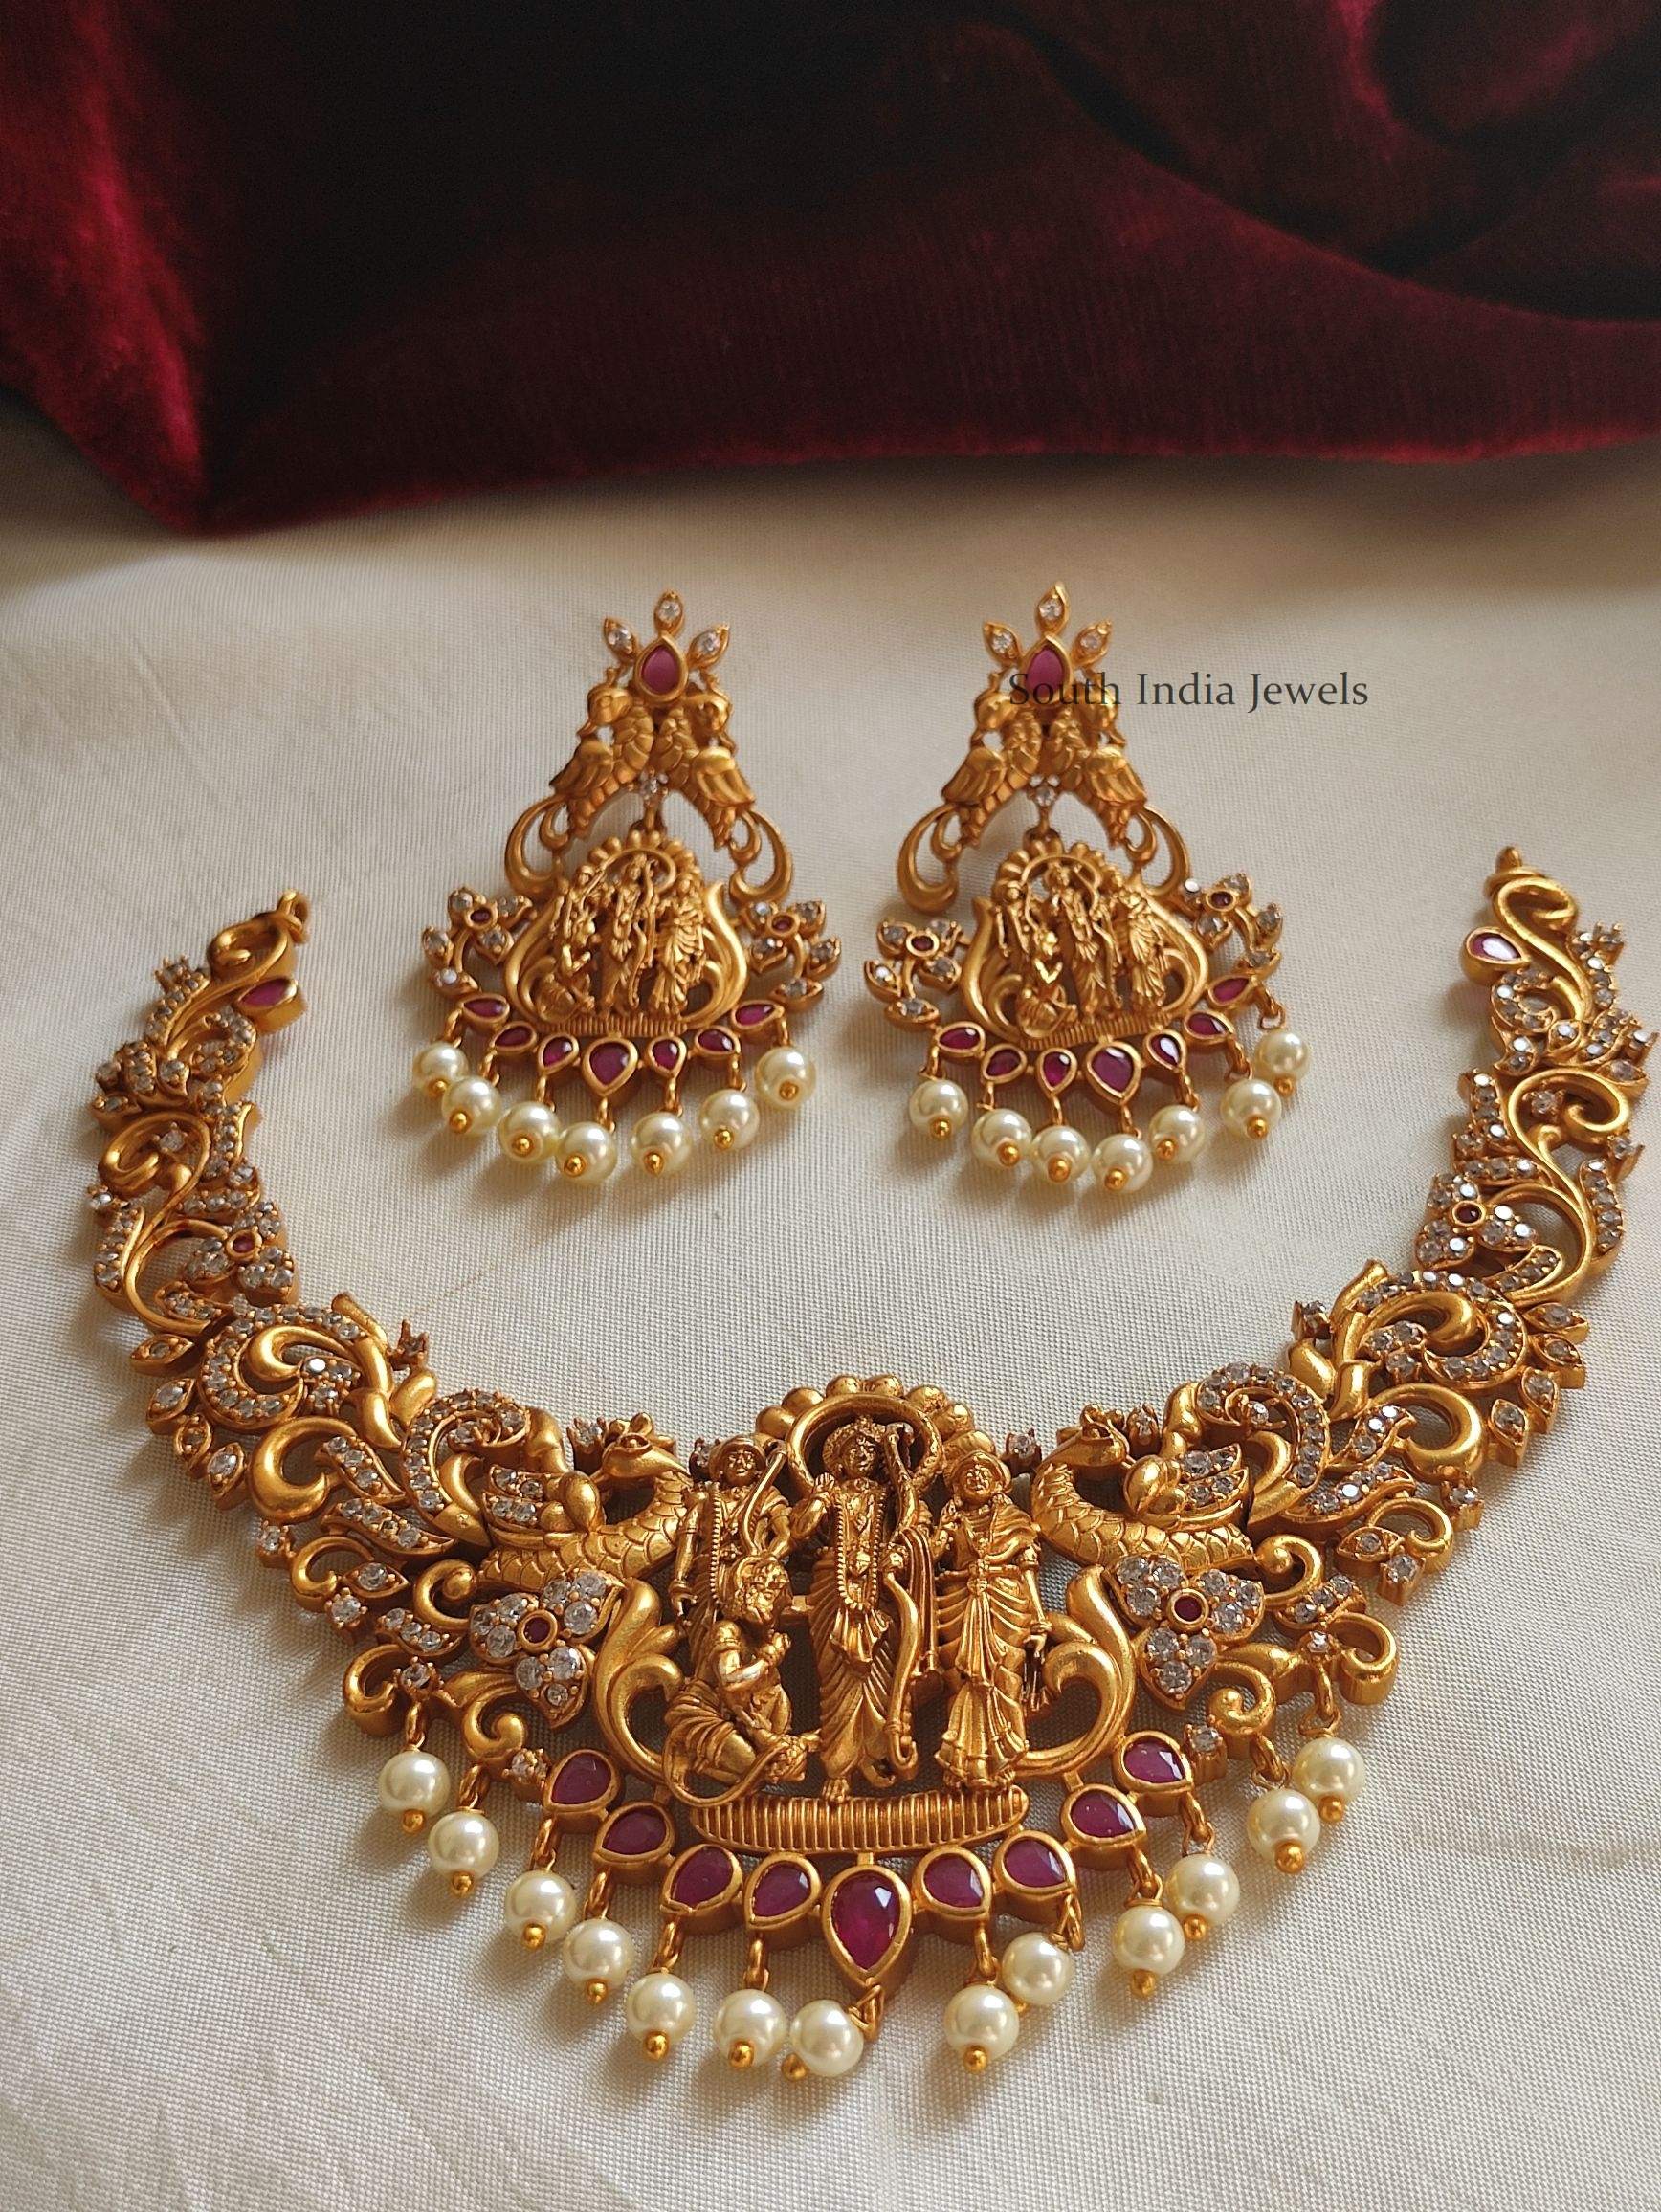 Traditional Ramparivar AD Stone Necklace - South India Jewels